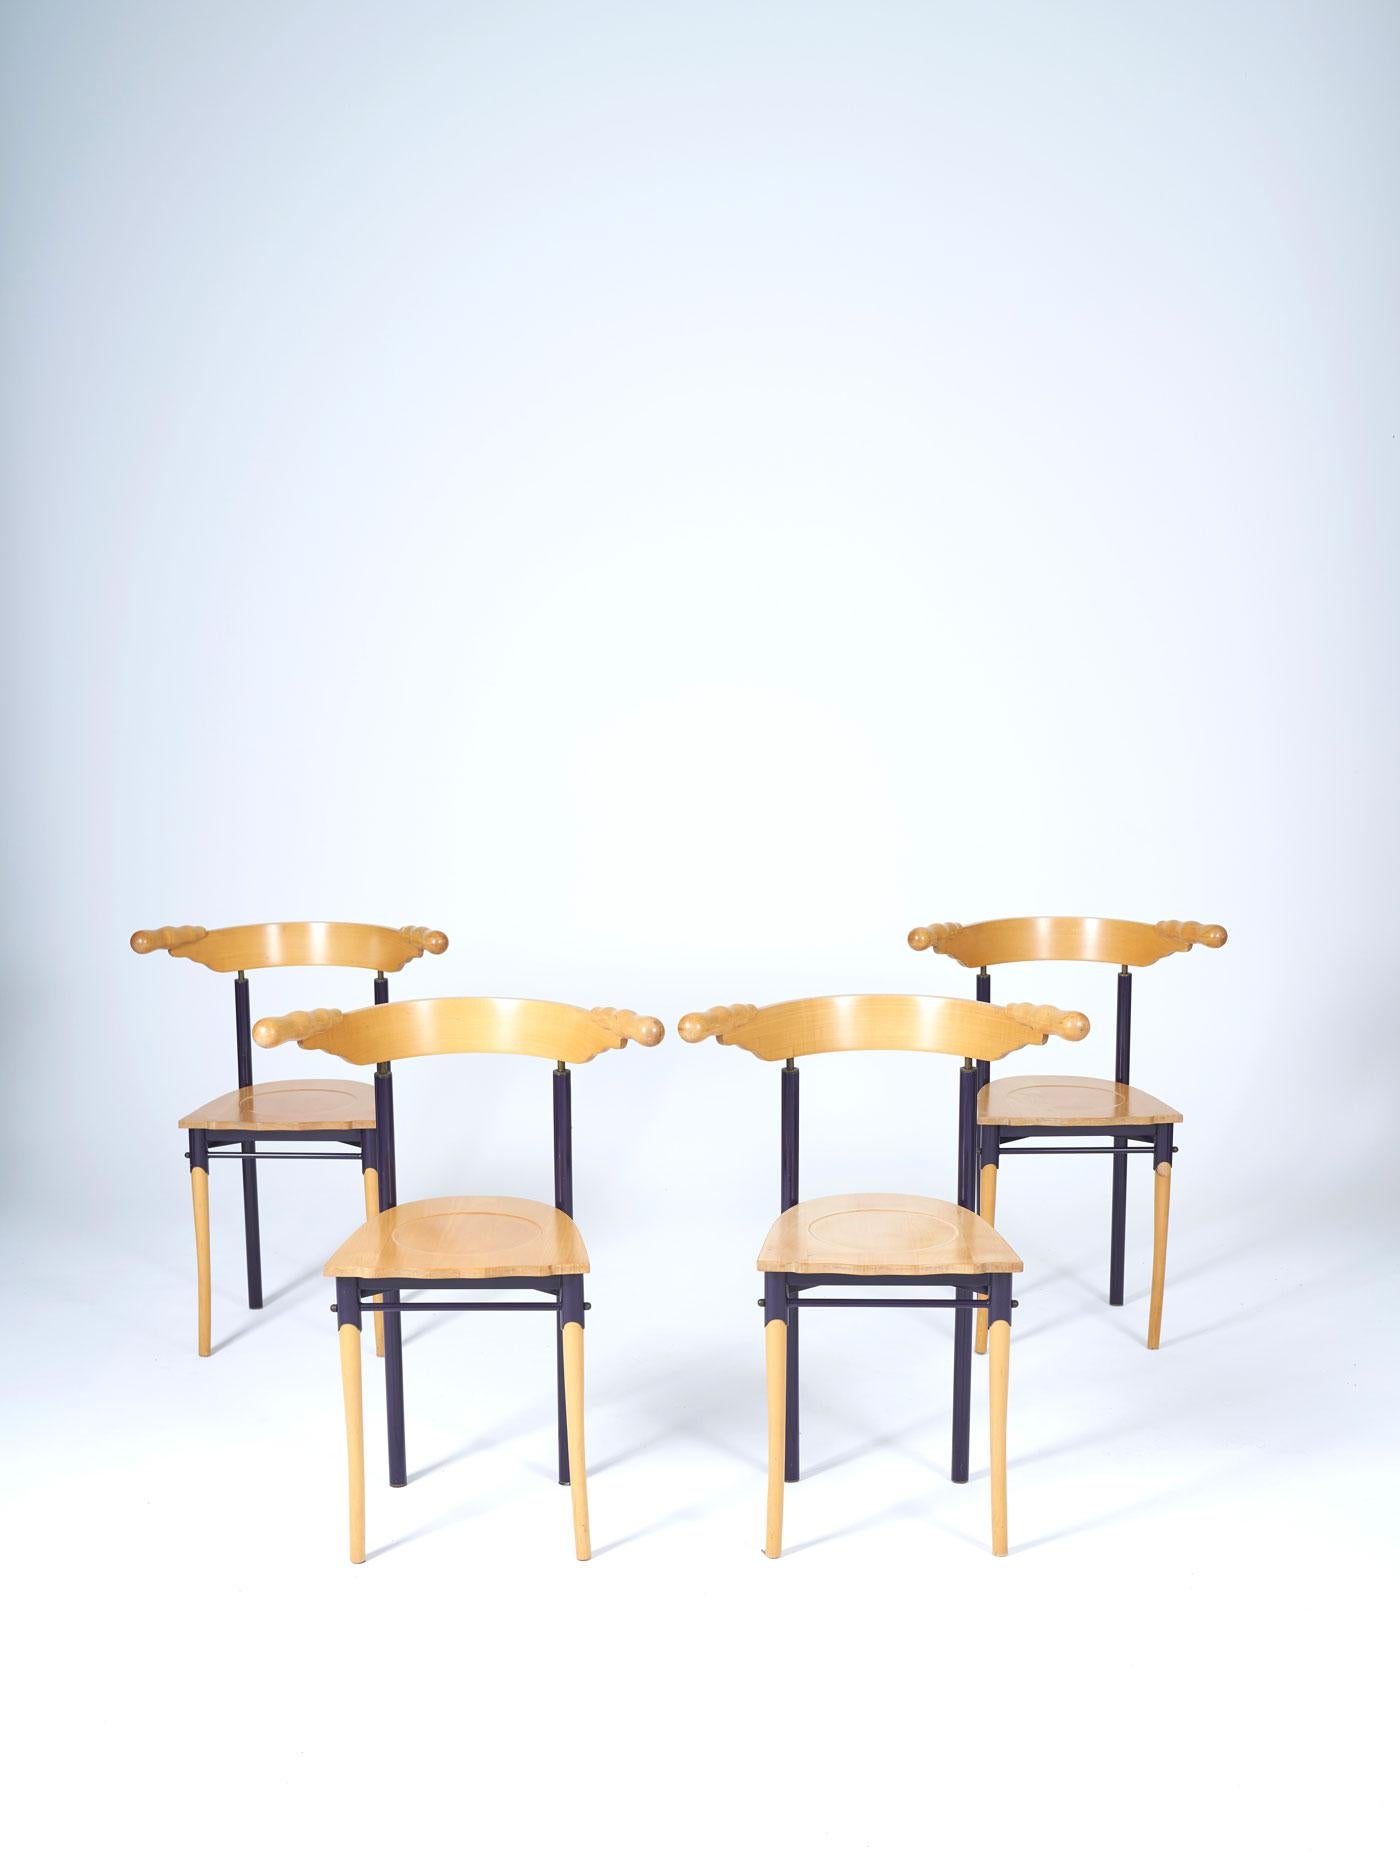 Set of 4 chairs model 'Jansky' by designer Borek Sipek, published by Driade in the 1980s. The armrests are made of maple, and the frame is in lacquered metal. Rare in this original condition, these chairs can fit into an interior with furniture by